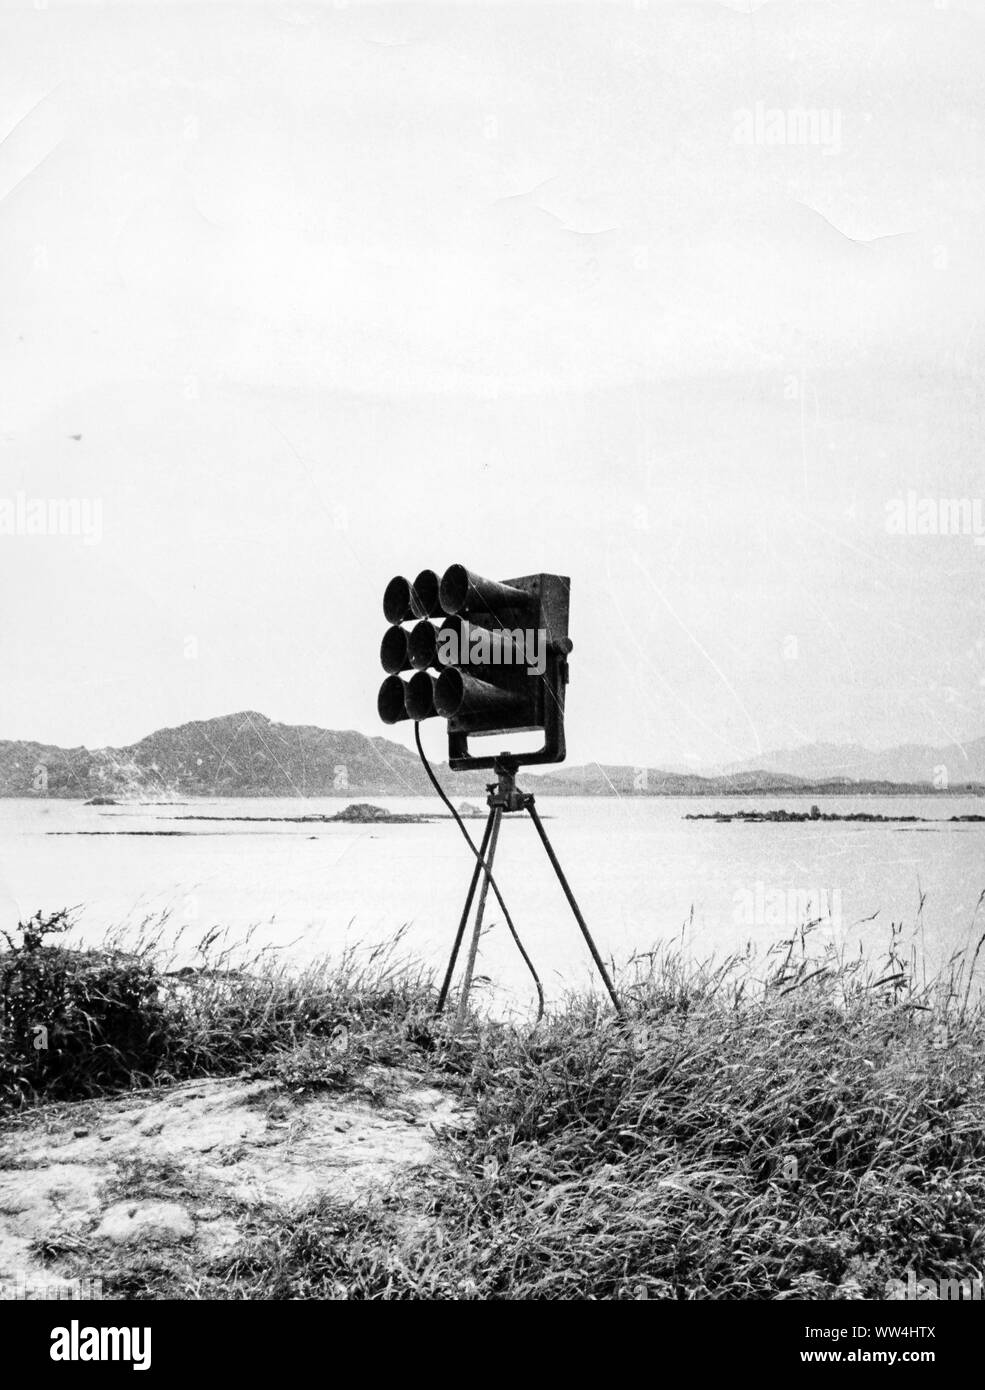 loudspeakers that replicated the propagandistic proclamations launched from the communist coast, quemoy island, crisis of the Strait of Formosa, China, May 1956 Stock Photo